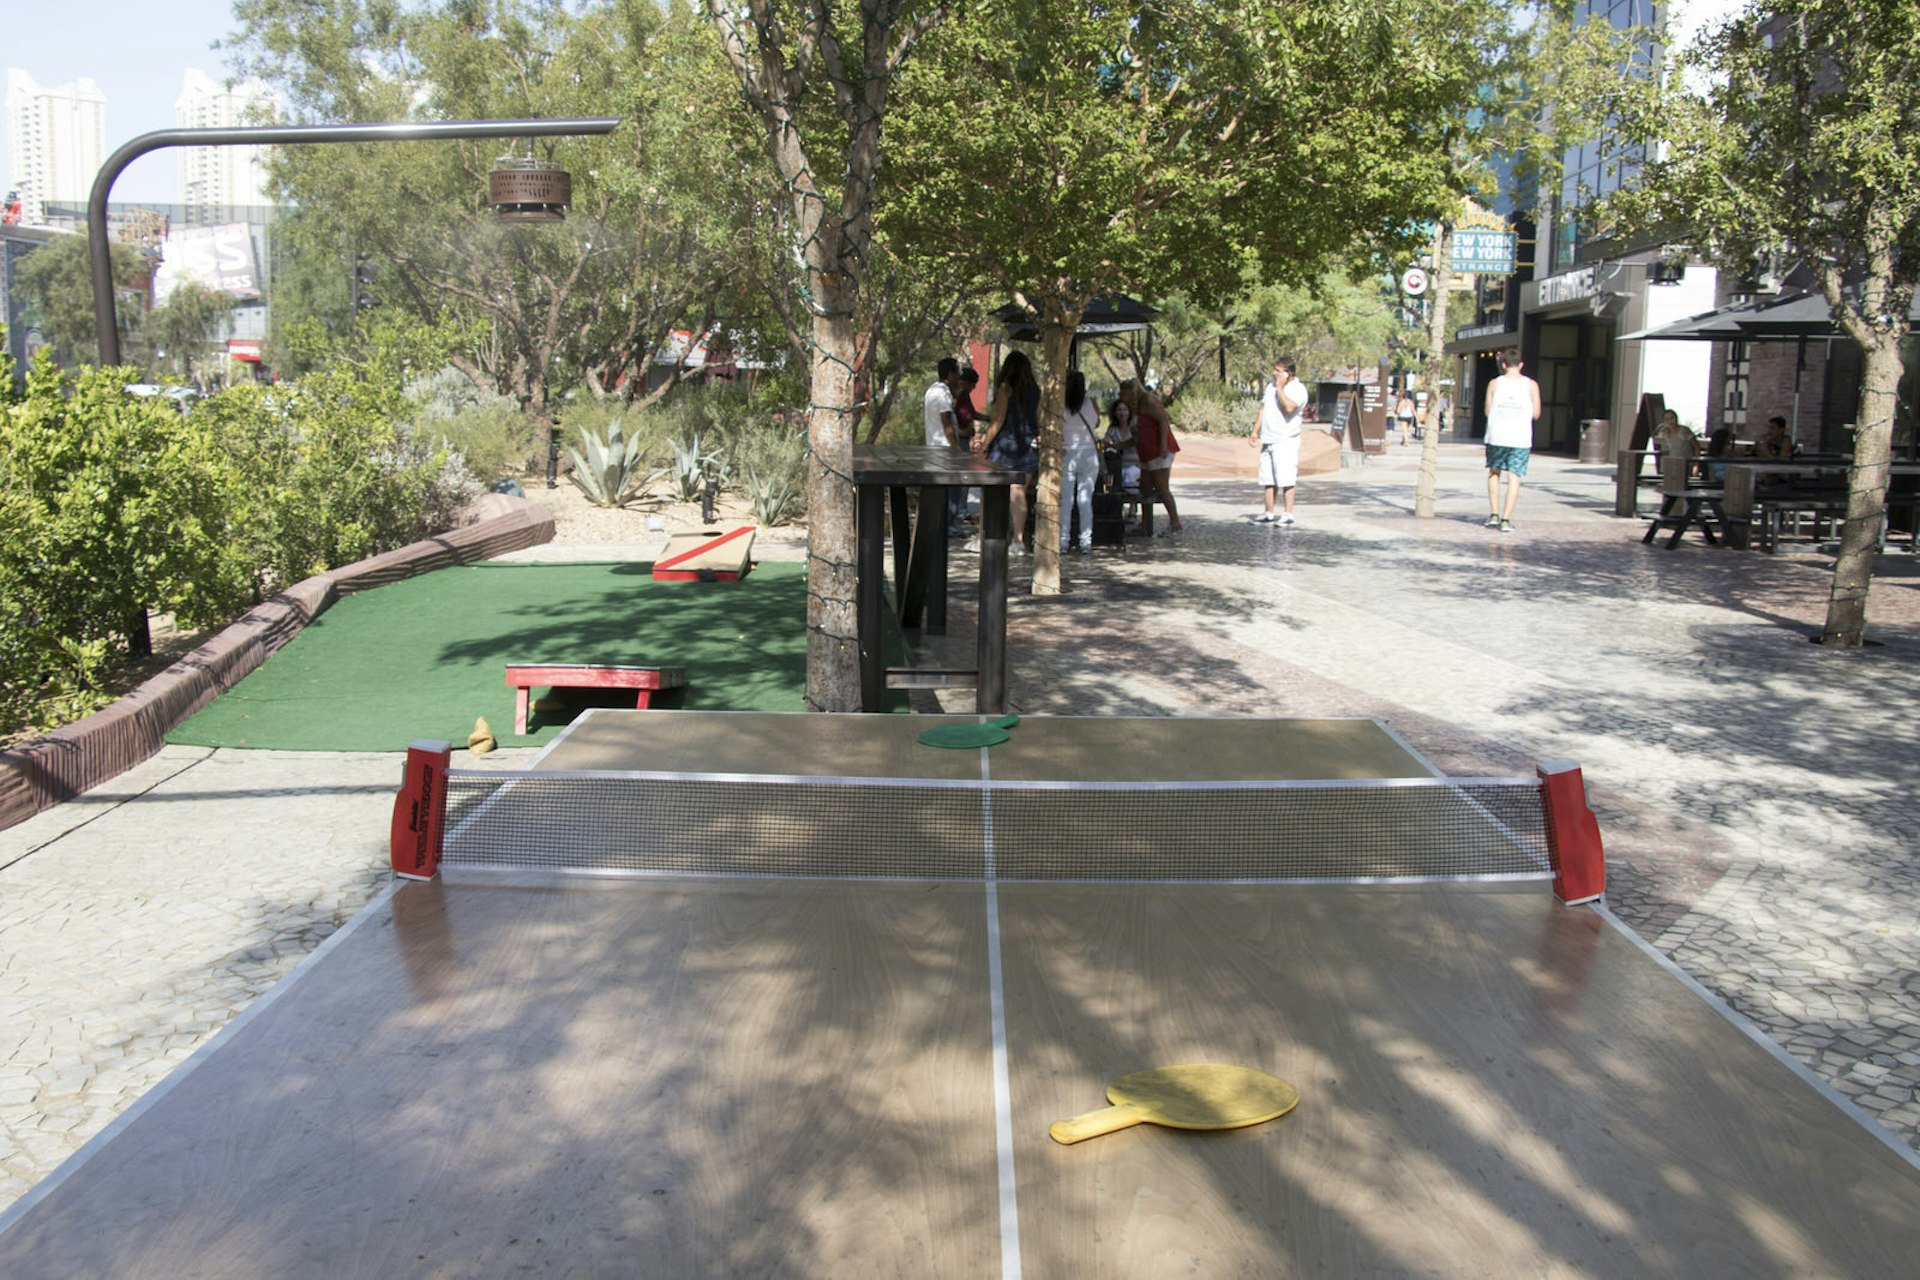 A ping-pong table is set up in an outdoor setting. In the background can be seen a putting green. © Greg Thilmont / Lonely Planet